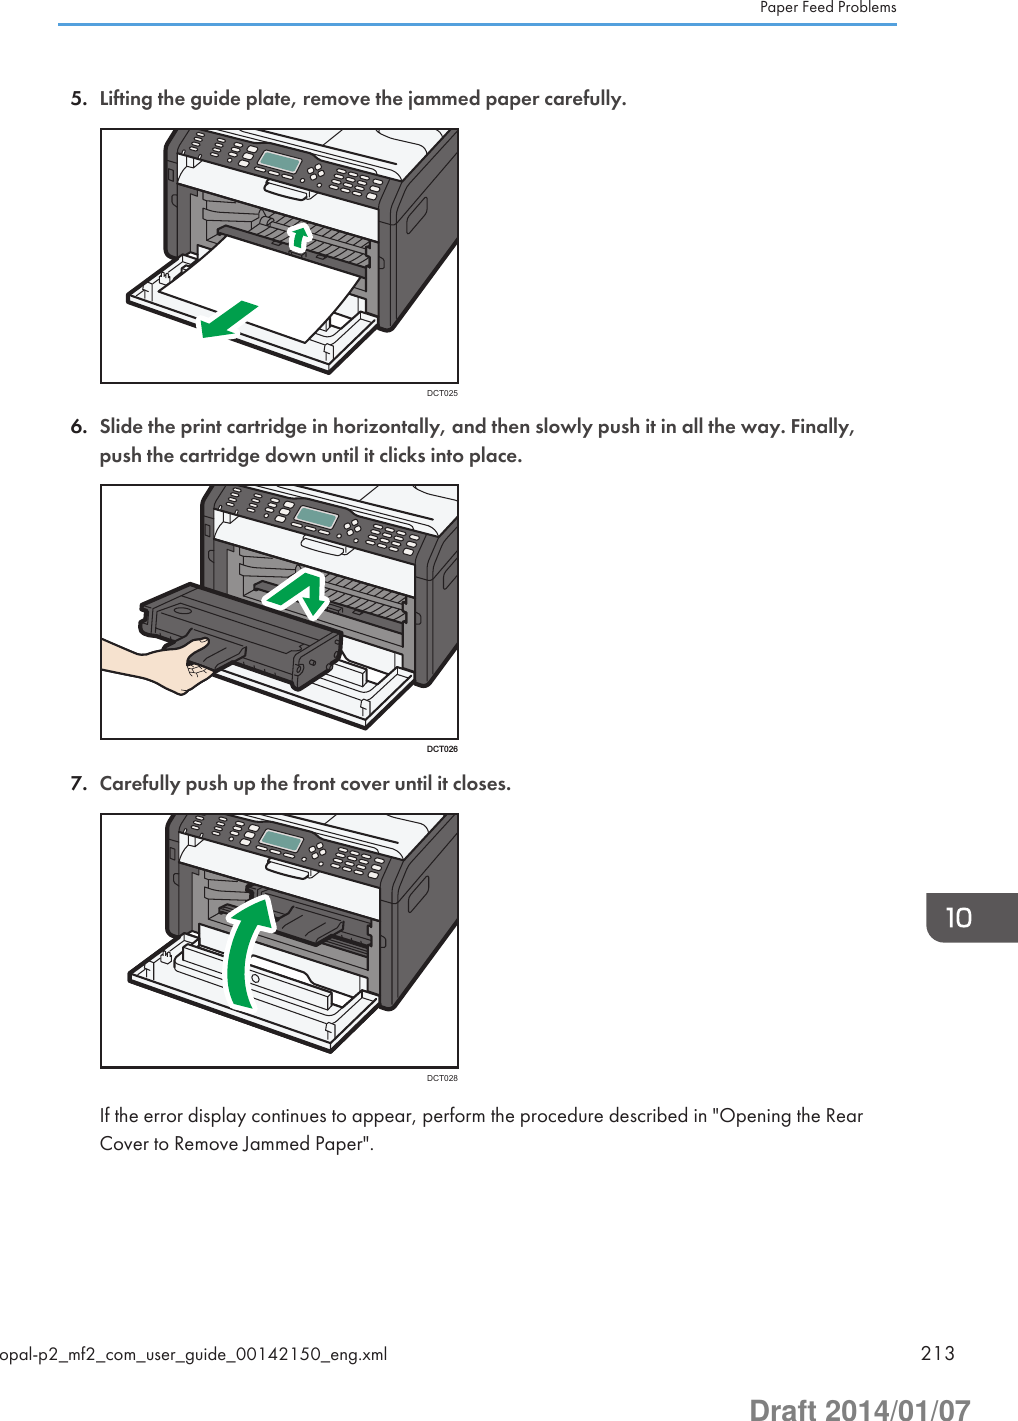 5. Lifting the guide plate, remove the jammed paper carefully.DCT0256. Slide the print cartridge in horizontally, and then slowly push it in all the way. Finally,push the cartridge down until it clicks into place.DCT0267. Carefully push up the front cover until it closes.DCT028If the error display continues to appear, perform the procedure described in &quot;Opening the RearCover to Remove Jammed Paper&quot;.Paper Feed Problemsopal-p2_mf2_com_user_guide_00142150_eng.xml 213Draft 2014/01/07